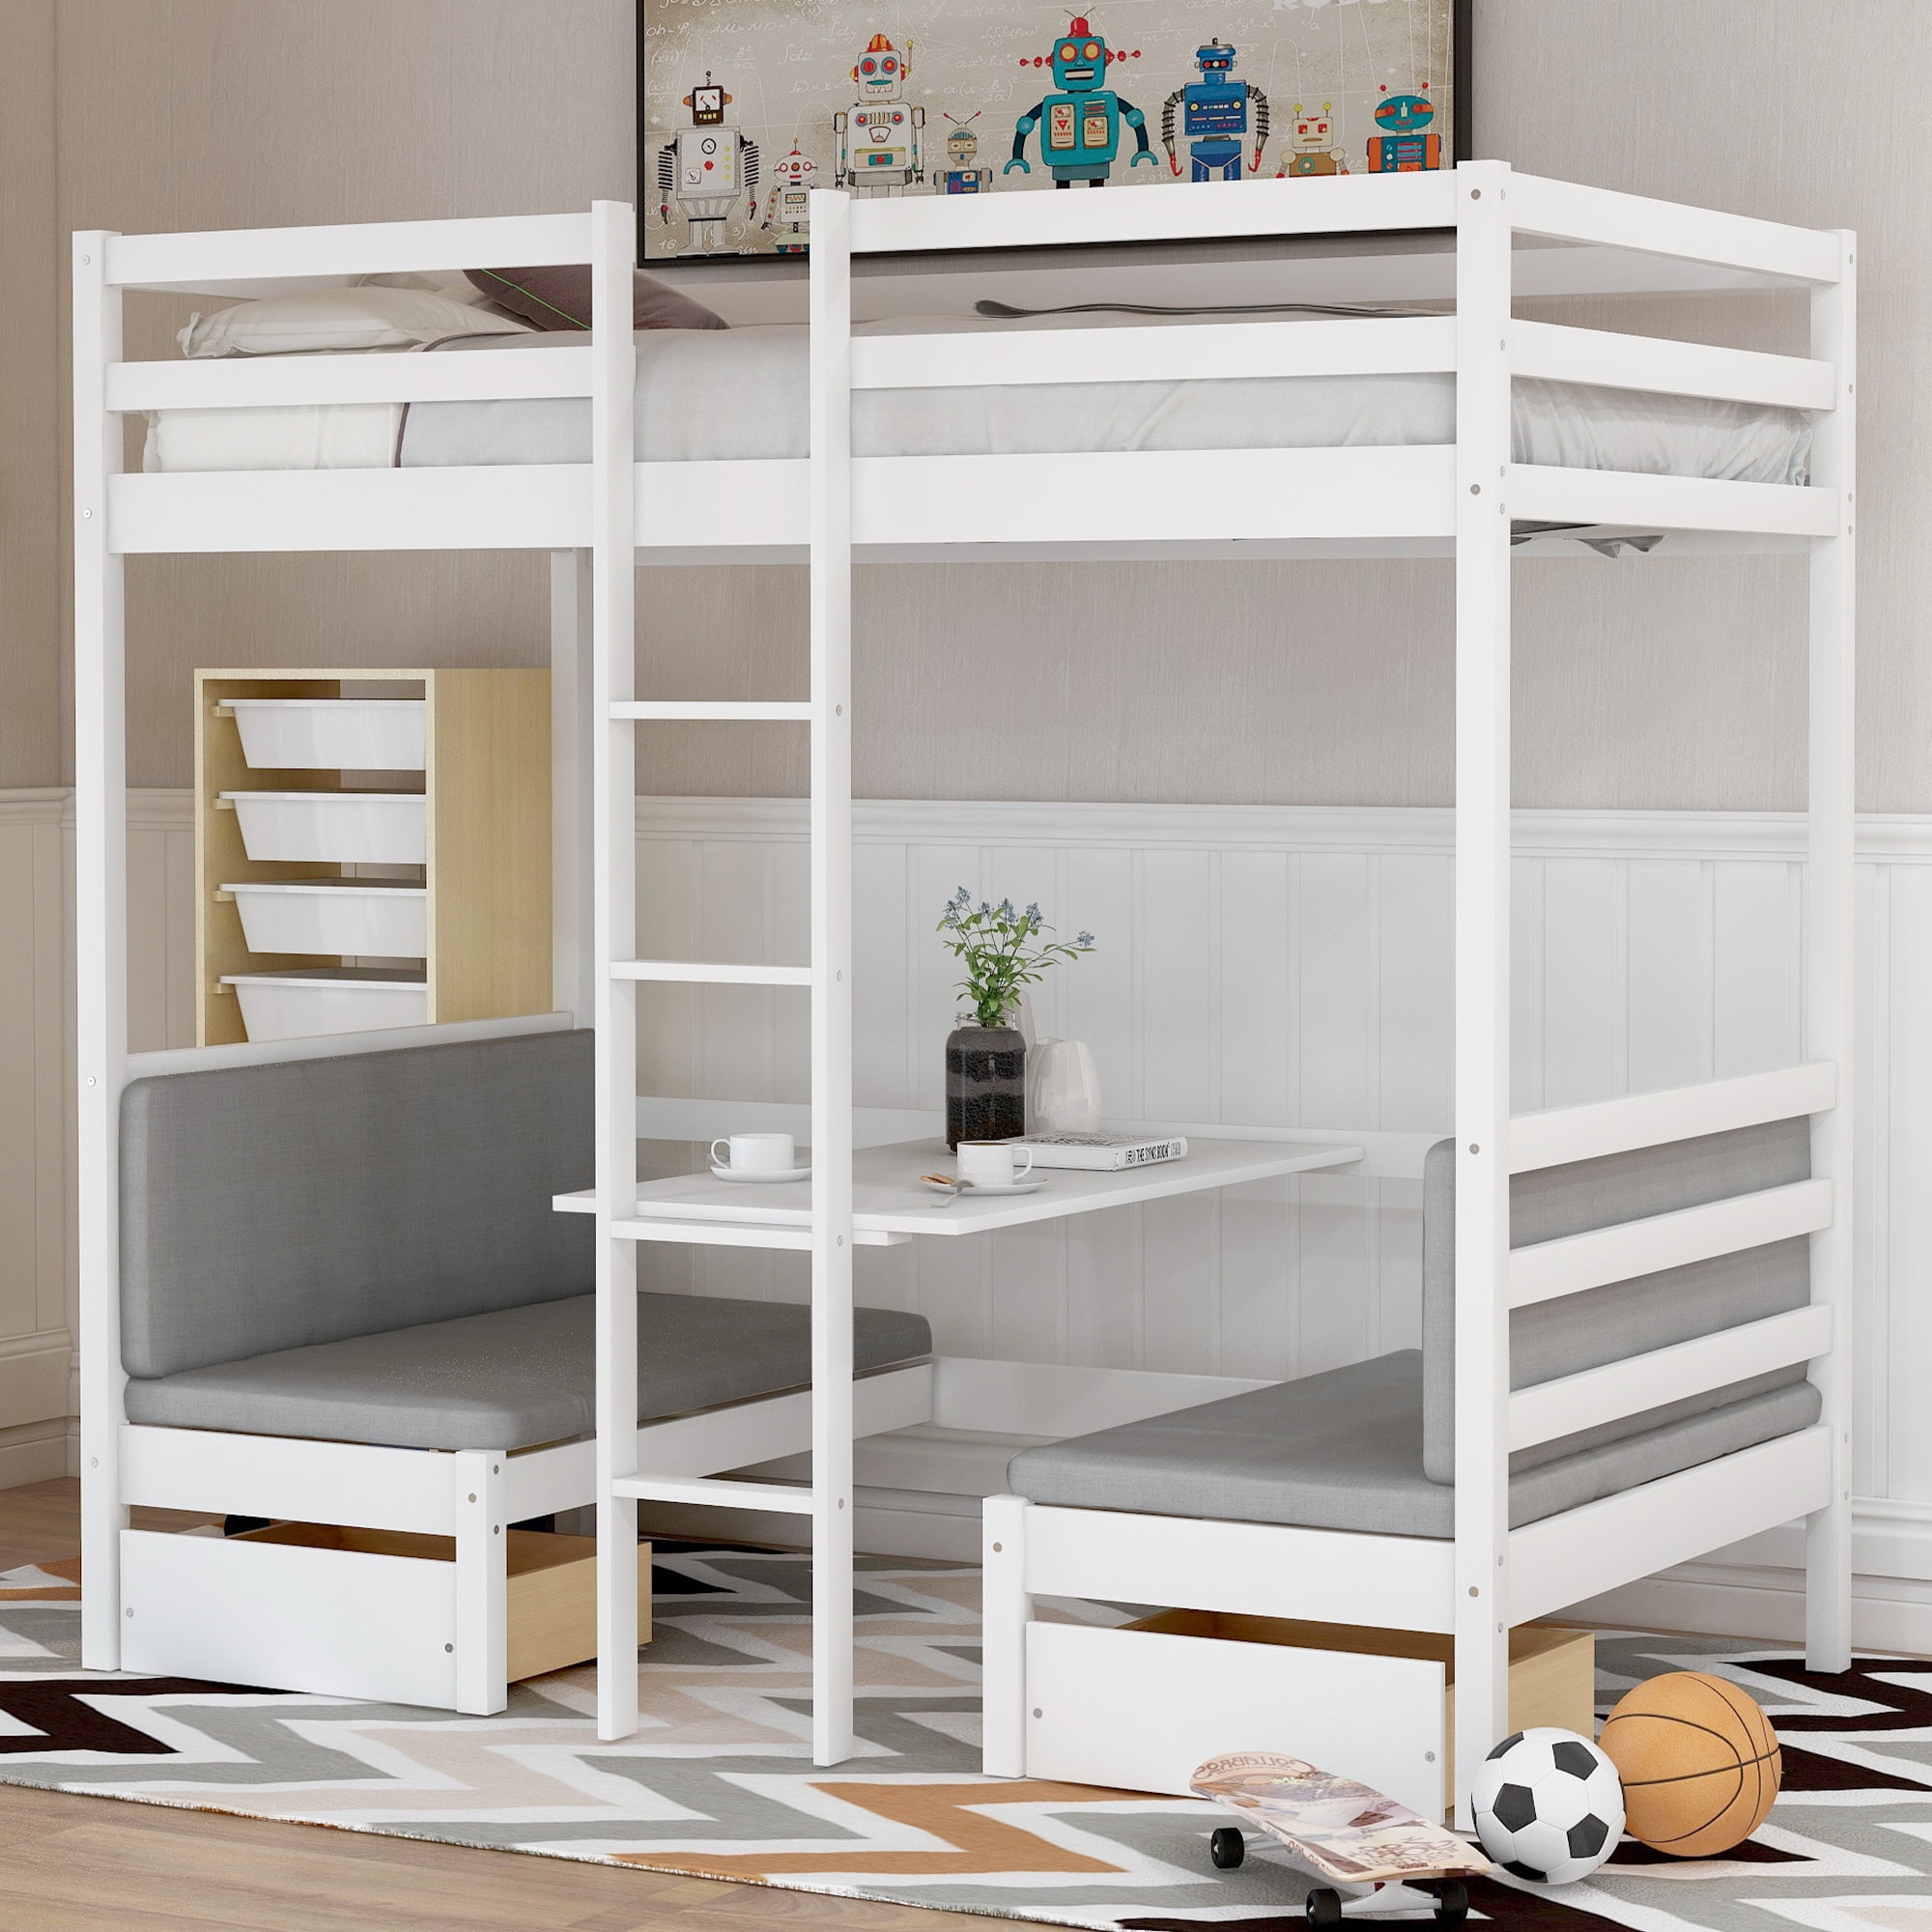 Euroco Solid Wood Convertible Twin Bunk, Fold Out Bunk Beds